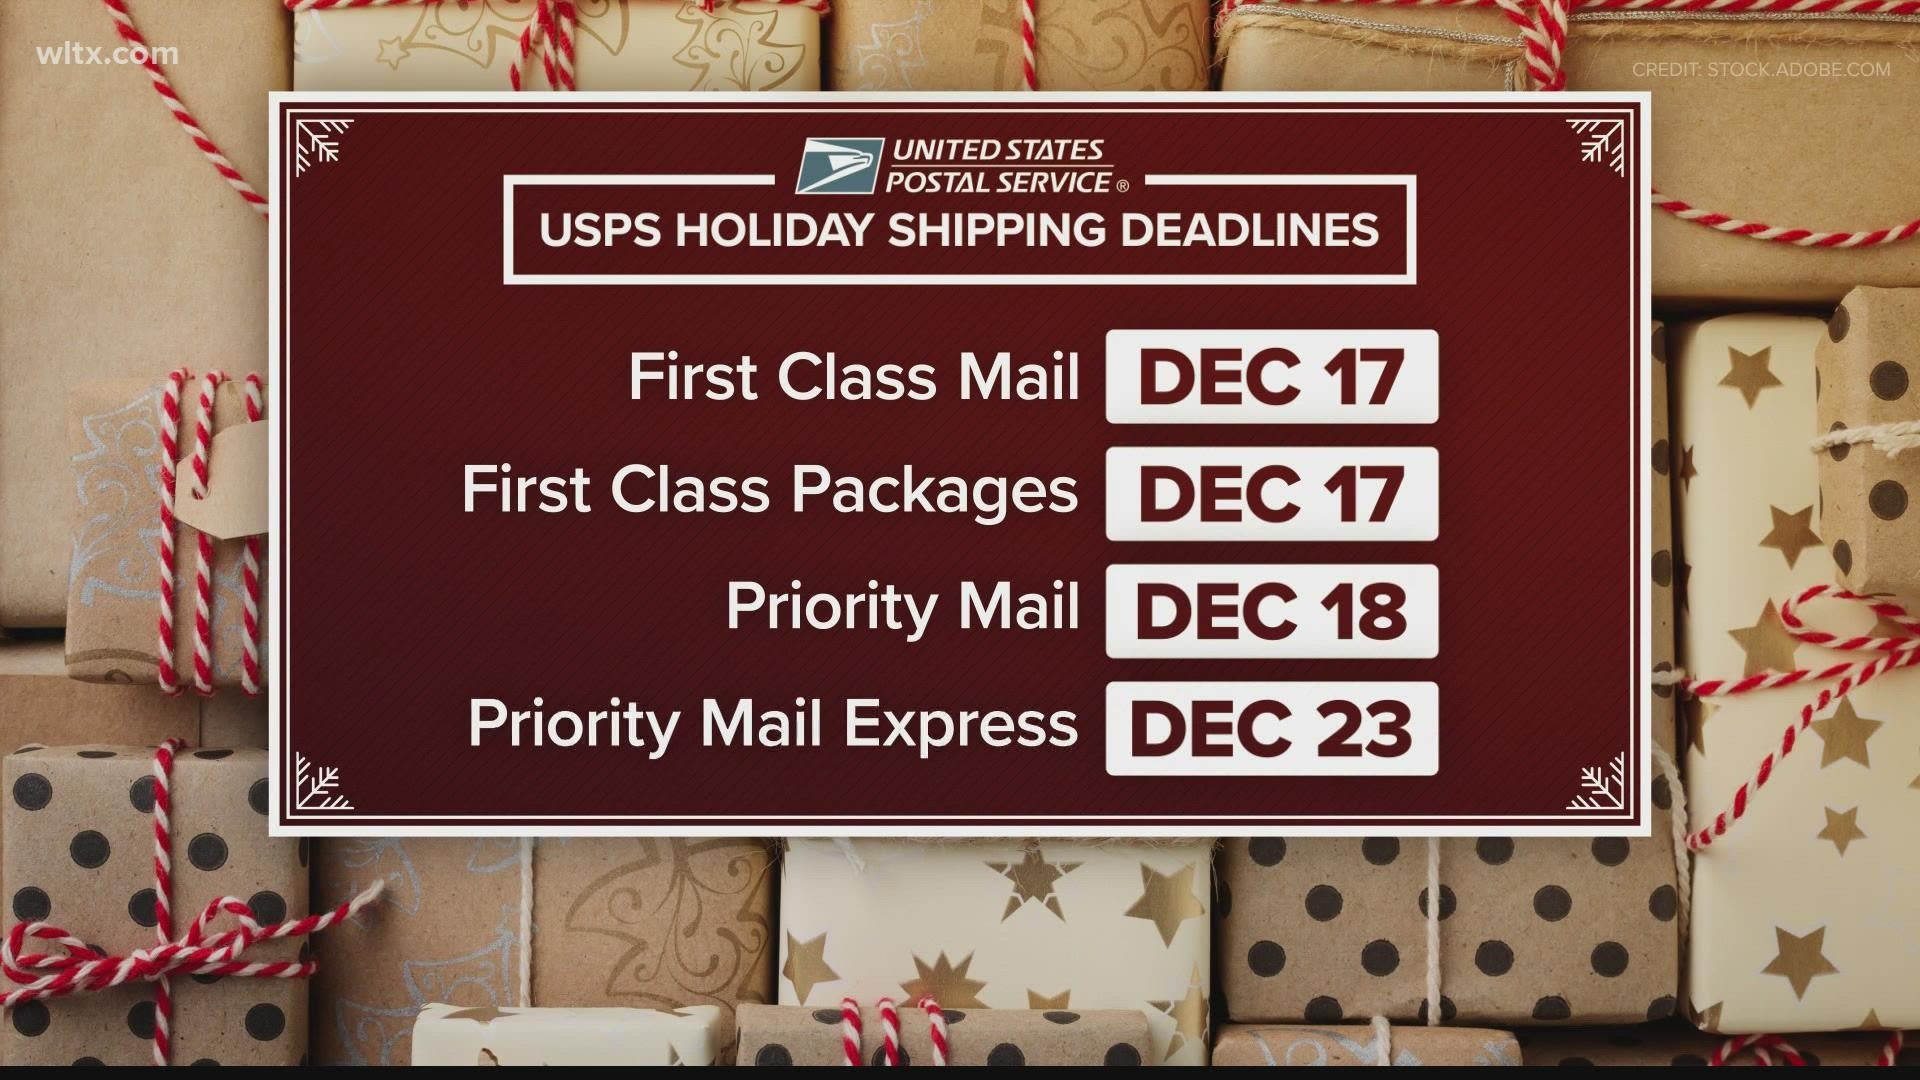 With reported supply chain issues and new USPS changes, getting your holiday gifts and cards in the mail on-time will be extra important this year.